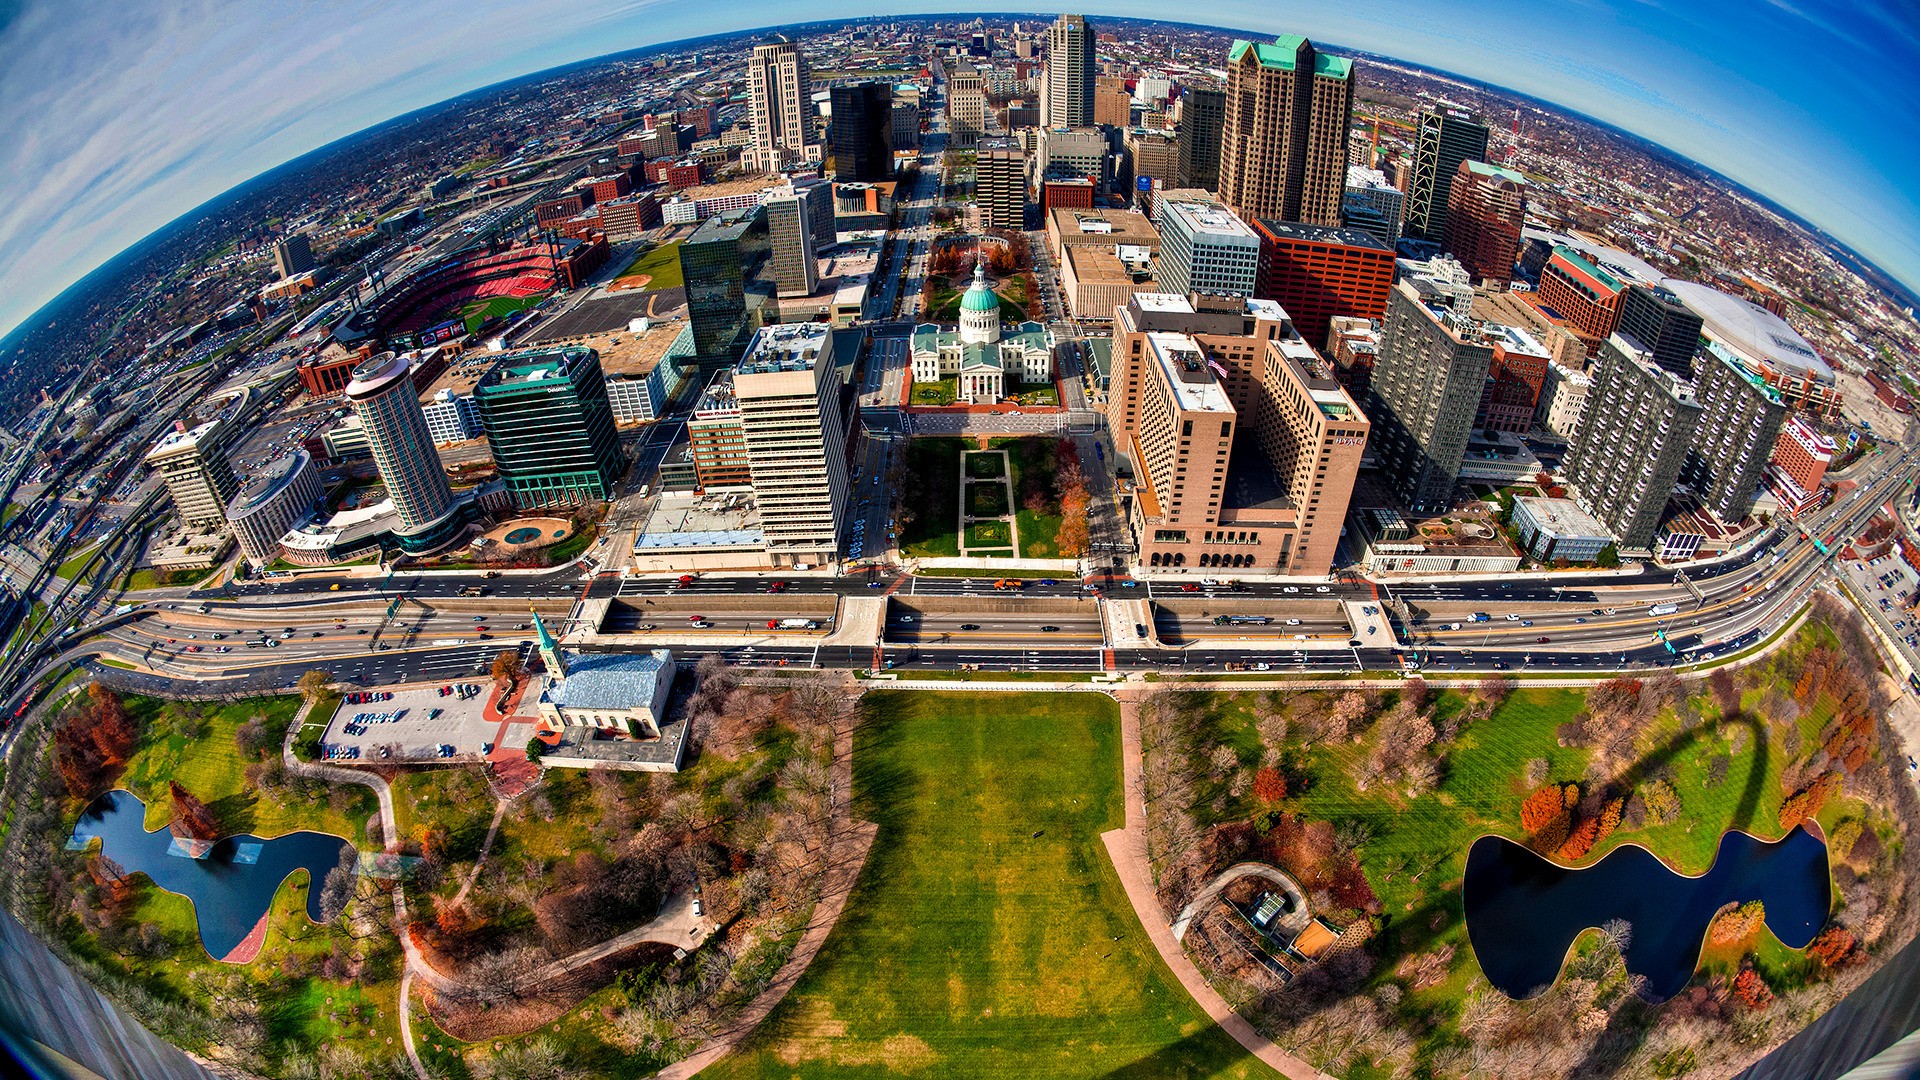 General 1920x1080 cityscape city HDR building St. Louis USA aerial view